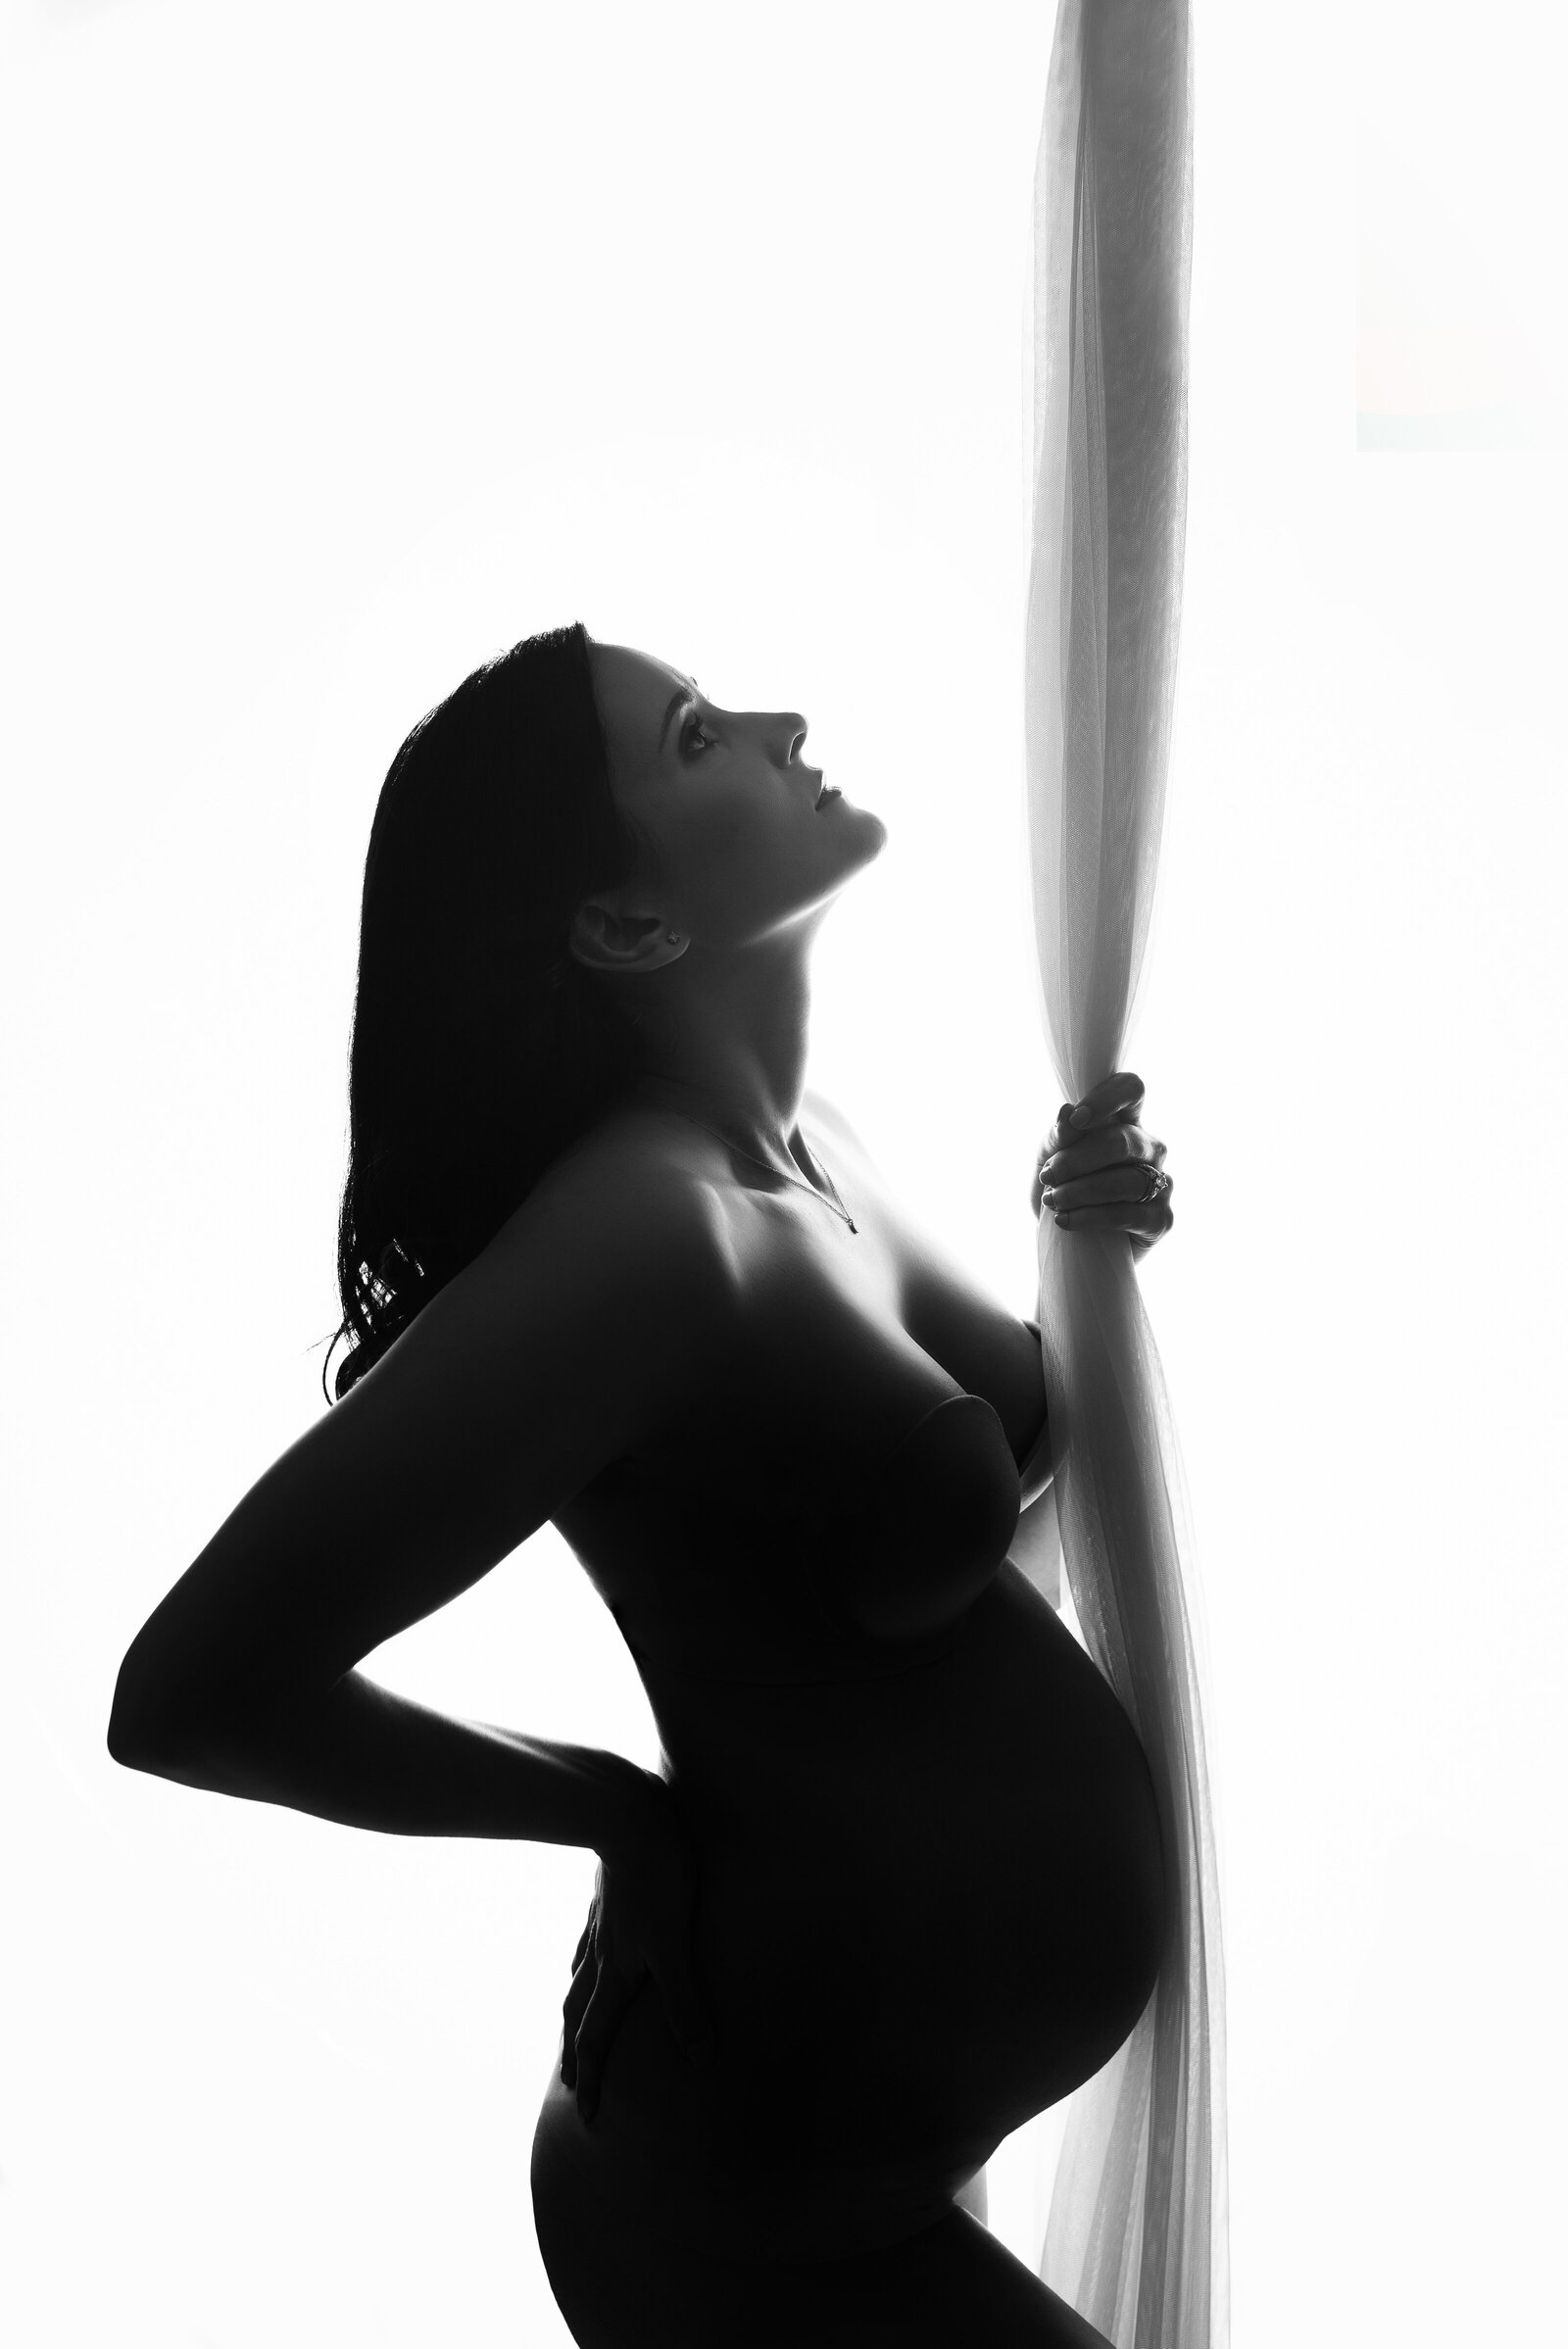 30 week pregnant woman posing for portrait standing up with hand on back and holding fabric with other hand showing her baby bump